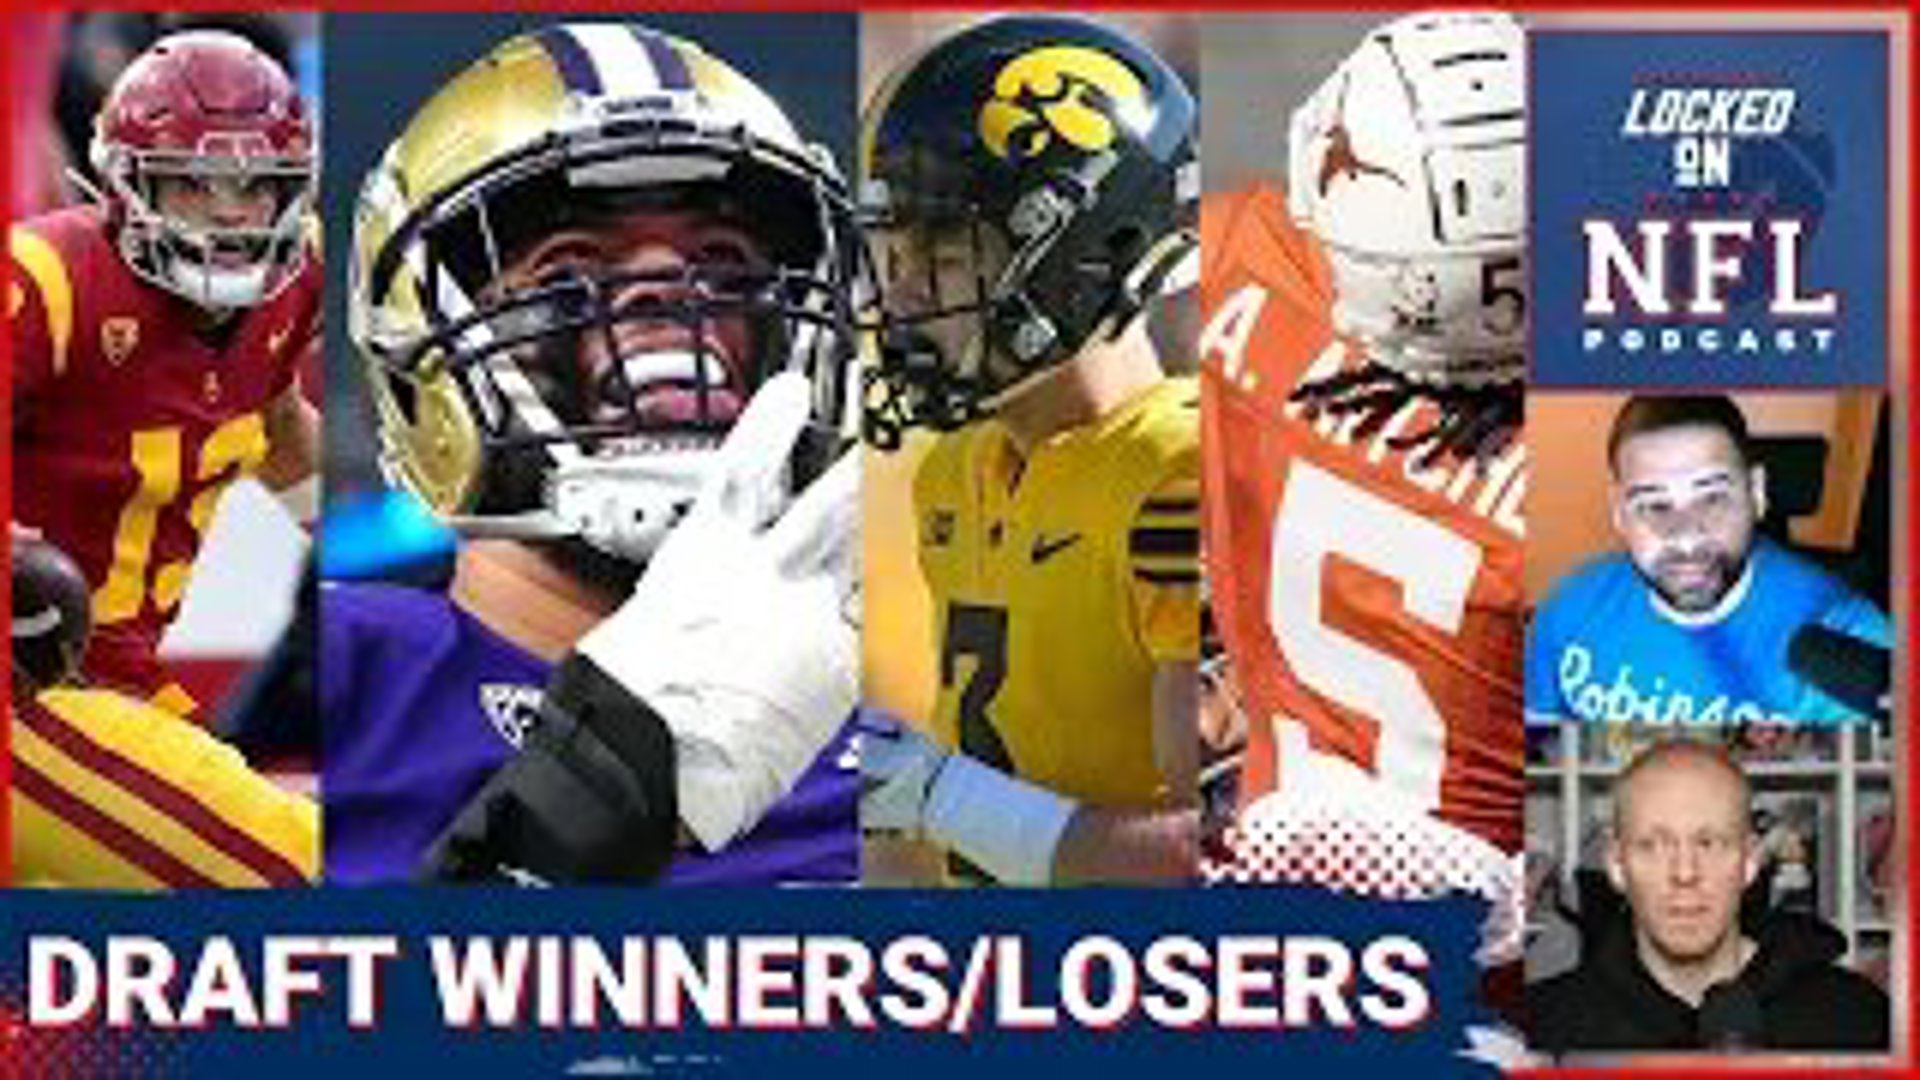 Who were the biggest winners and losers of the NFL Draft? Chris Carter and James Rapien break that down with their analysis of which teams had the biggest hauls.